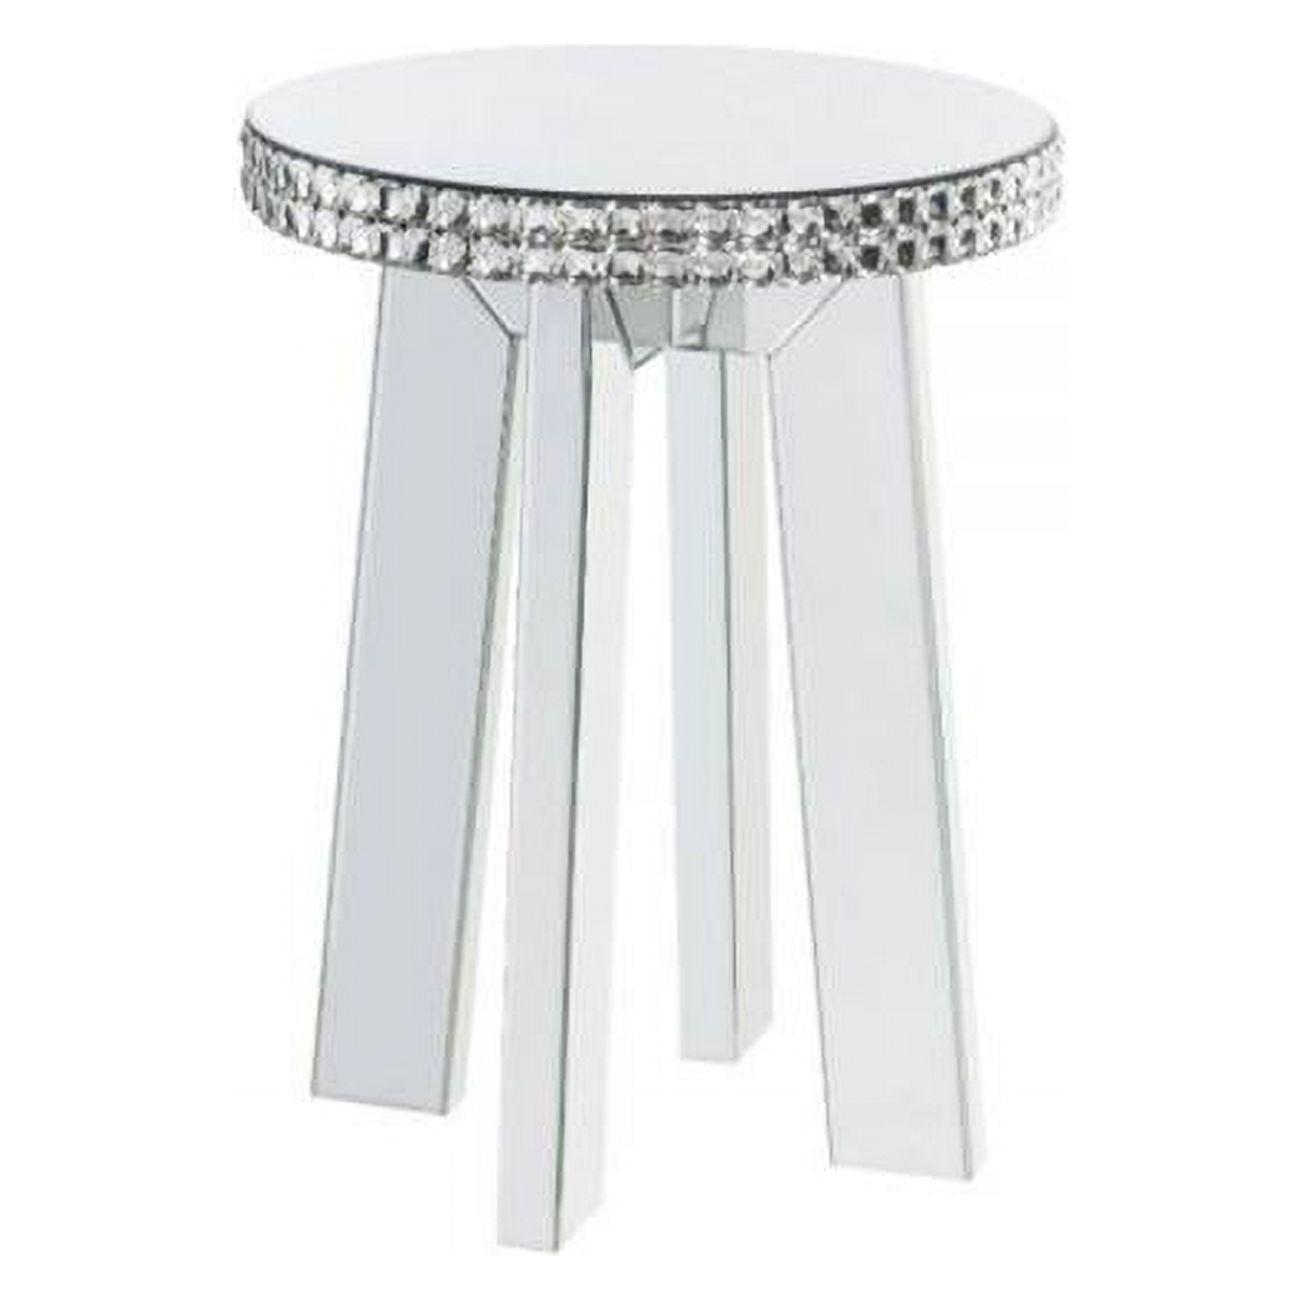 Chic Lotus Round Mirrored Wooden End Table with Faux Crystals